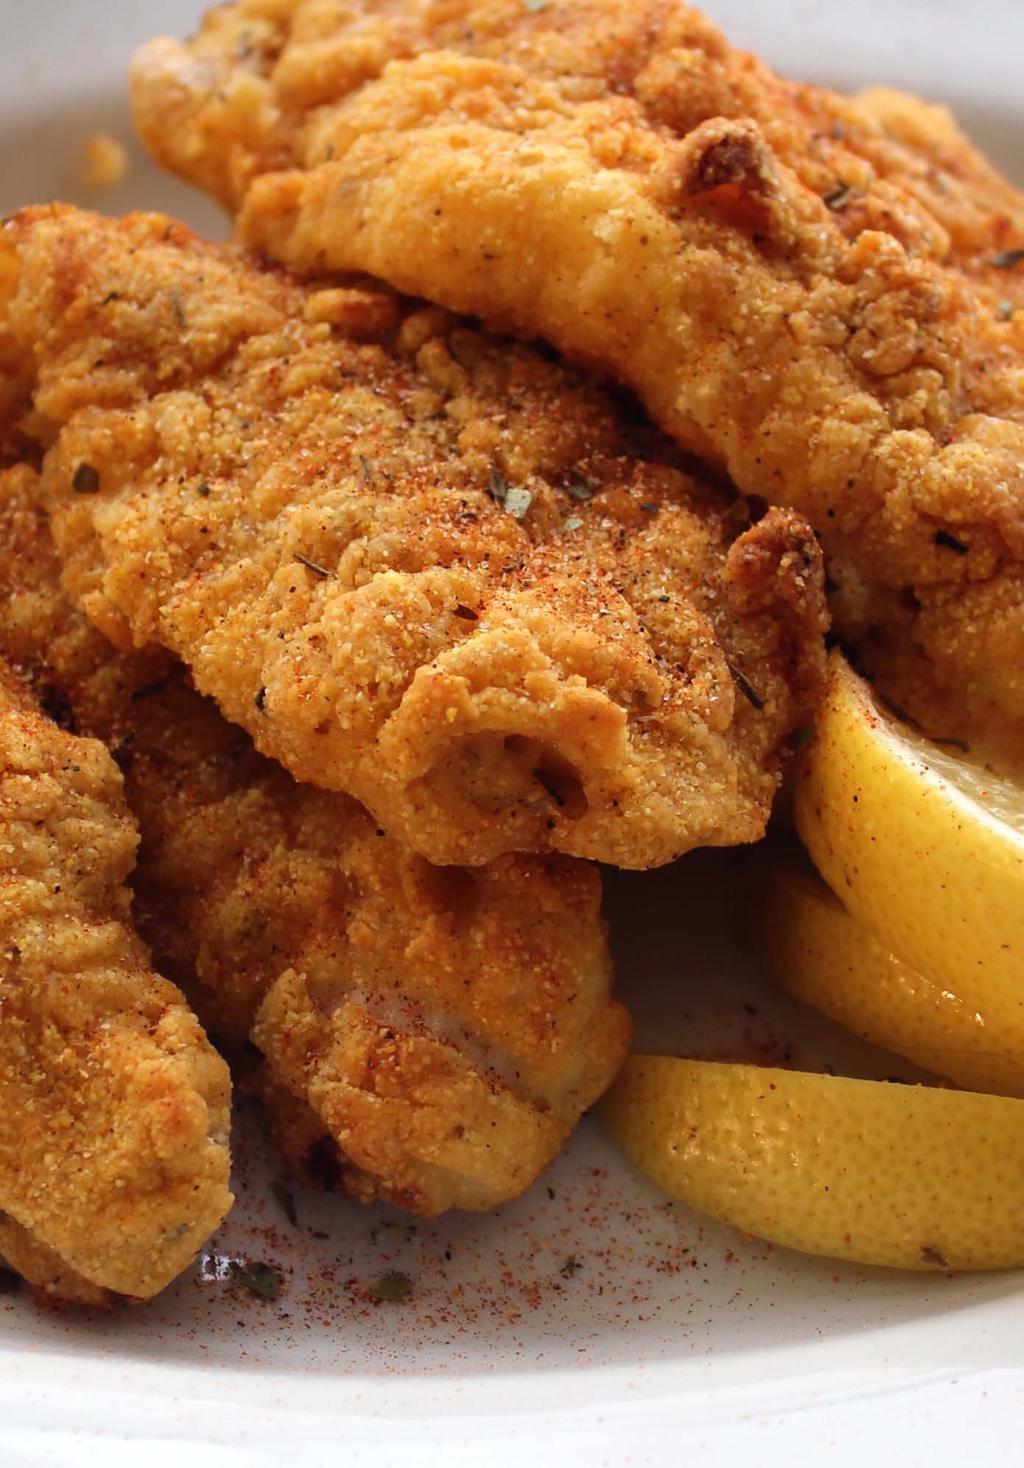 AIRFRIED CATFISH Prep time: 10 minutes Total time: 25 minutes 1 teaspoon Emeril s Original Essence or Creole seasoning ½ cup buttermilk ½ to ¾ pound catfish fillets 12 tablespoons all-purpose flour 8